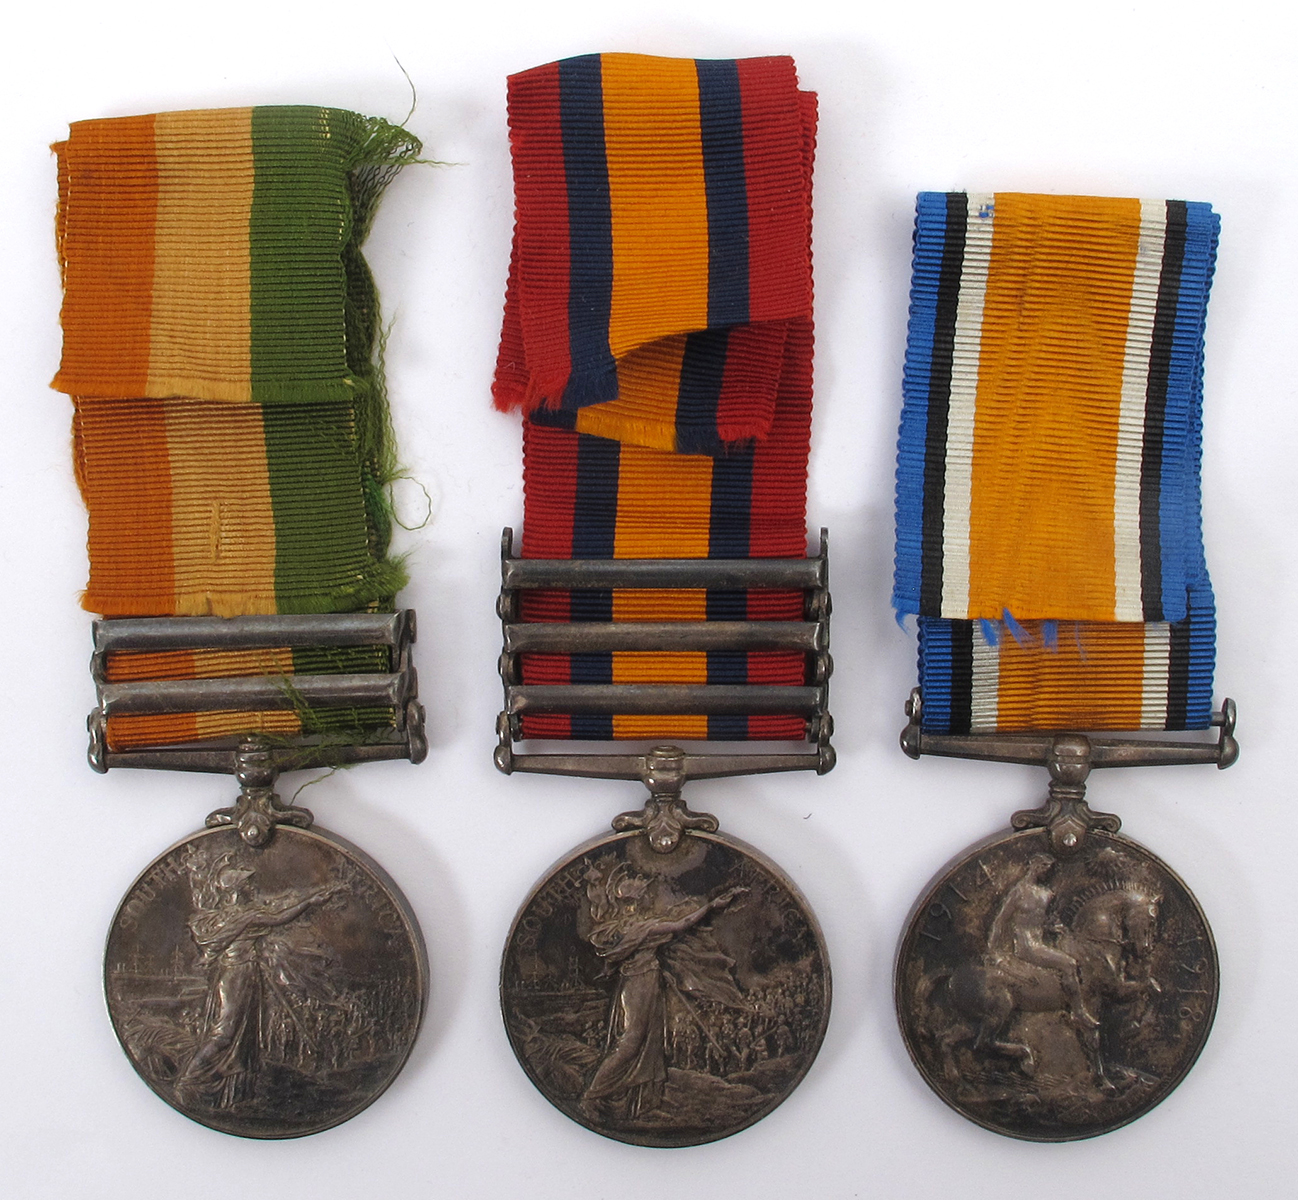 1899-1918 Anglo-Boer War and First World War medals to Royal Irish Rifles private J Baxter. Queen' - Image 2 of 2